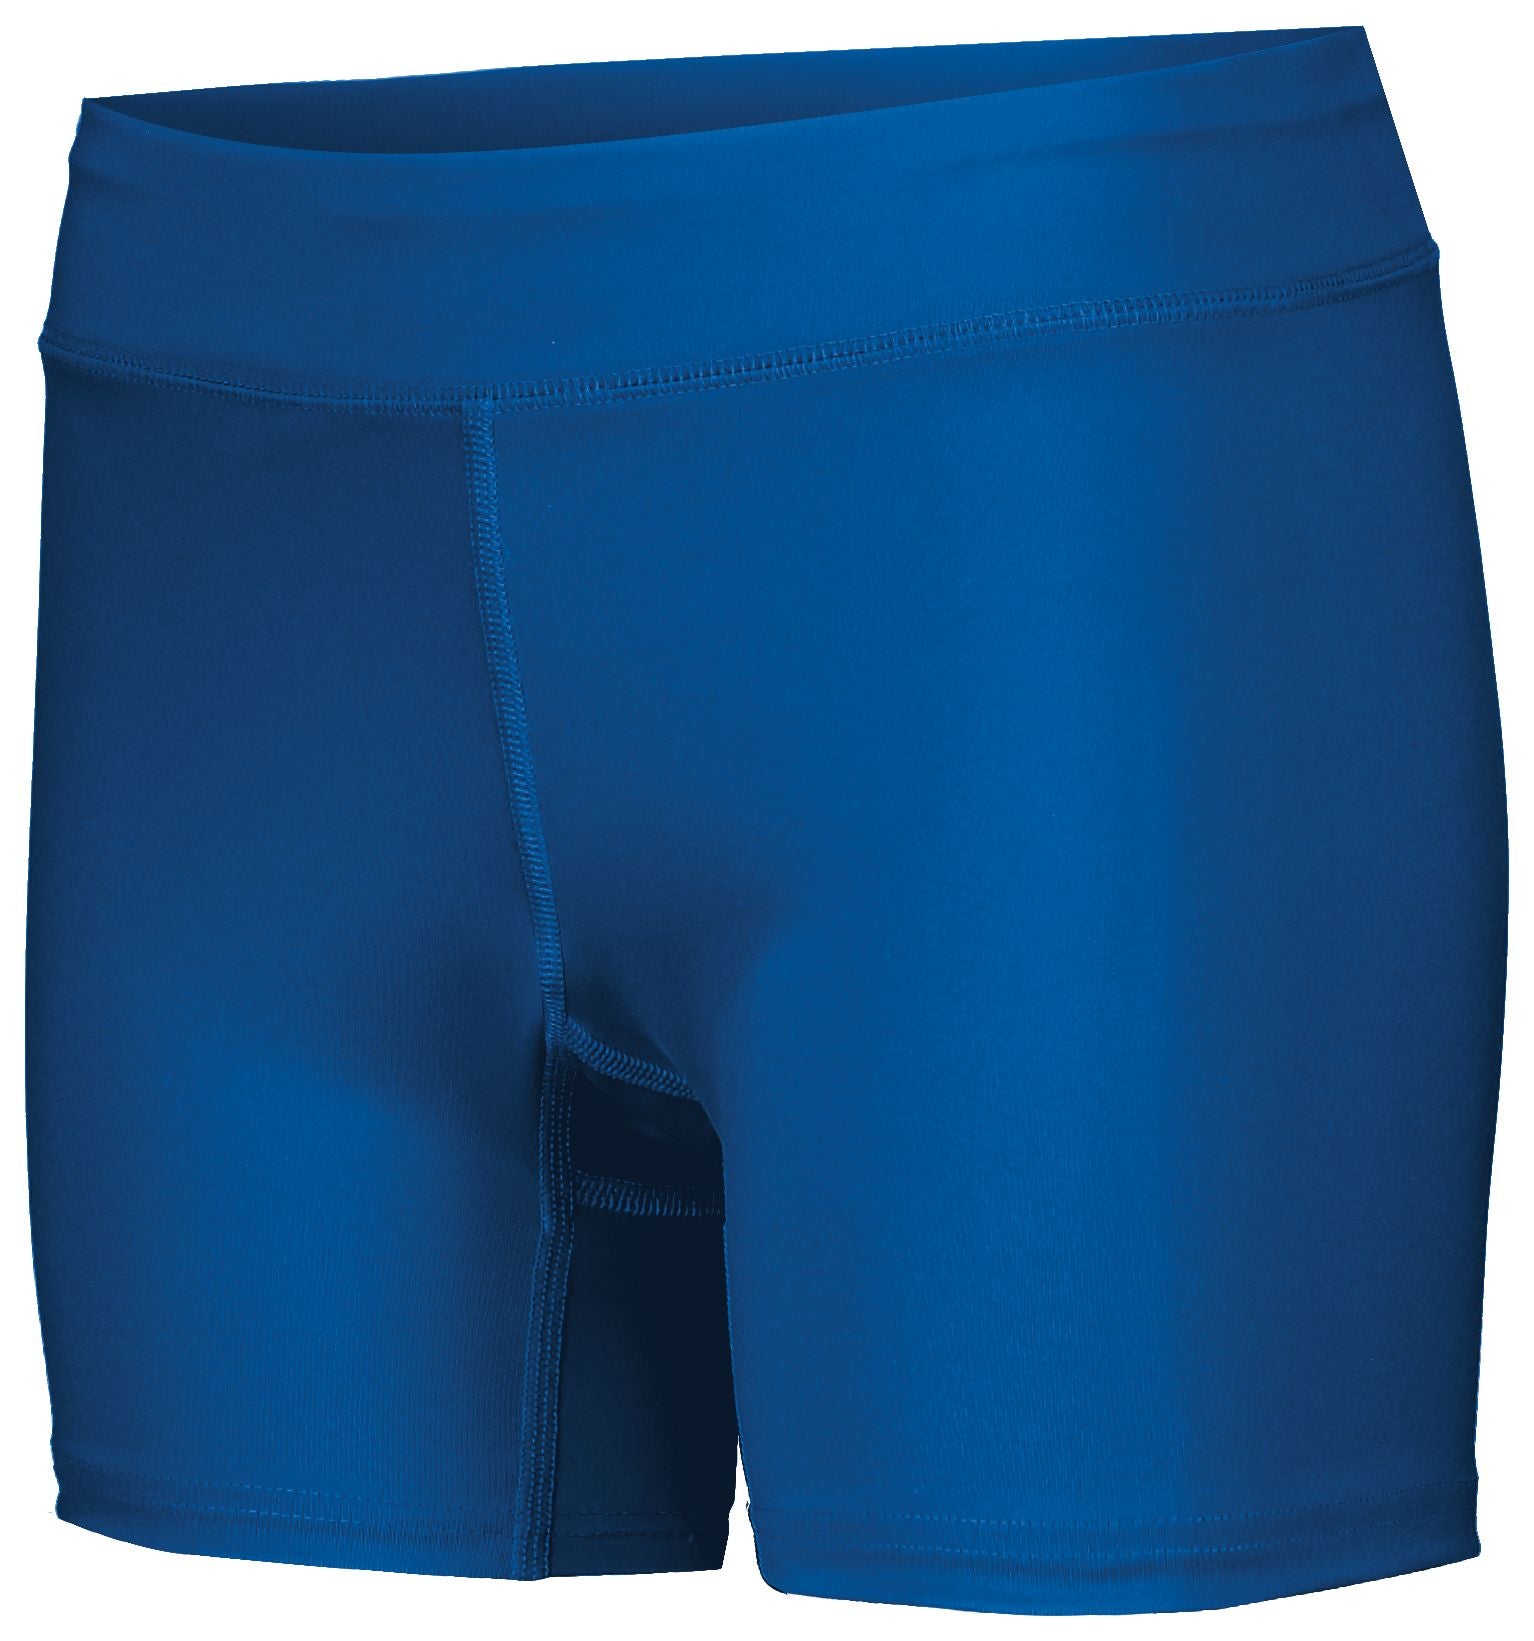 Holloway Ladies Pr Max Compression Shorts in Royal  -Part of the Ladies, Ladies-Shorts, Track-Field, Holloway product lines at KanaleyCreations.com